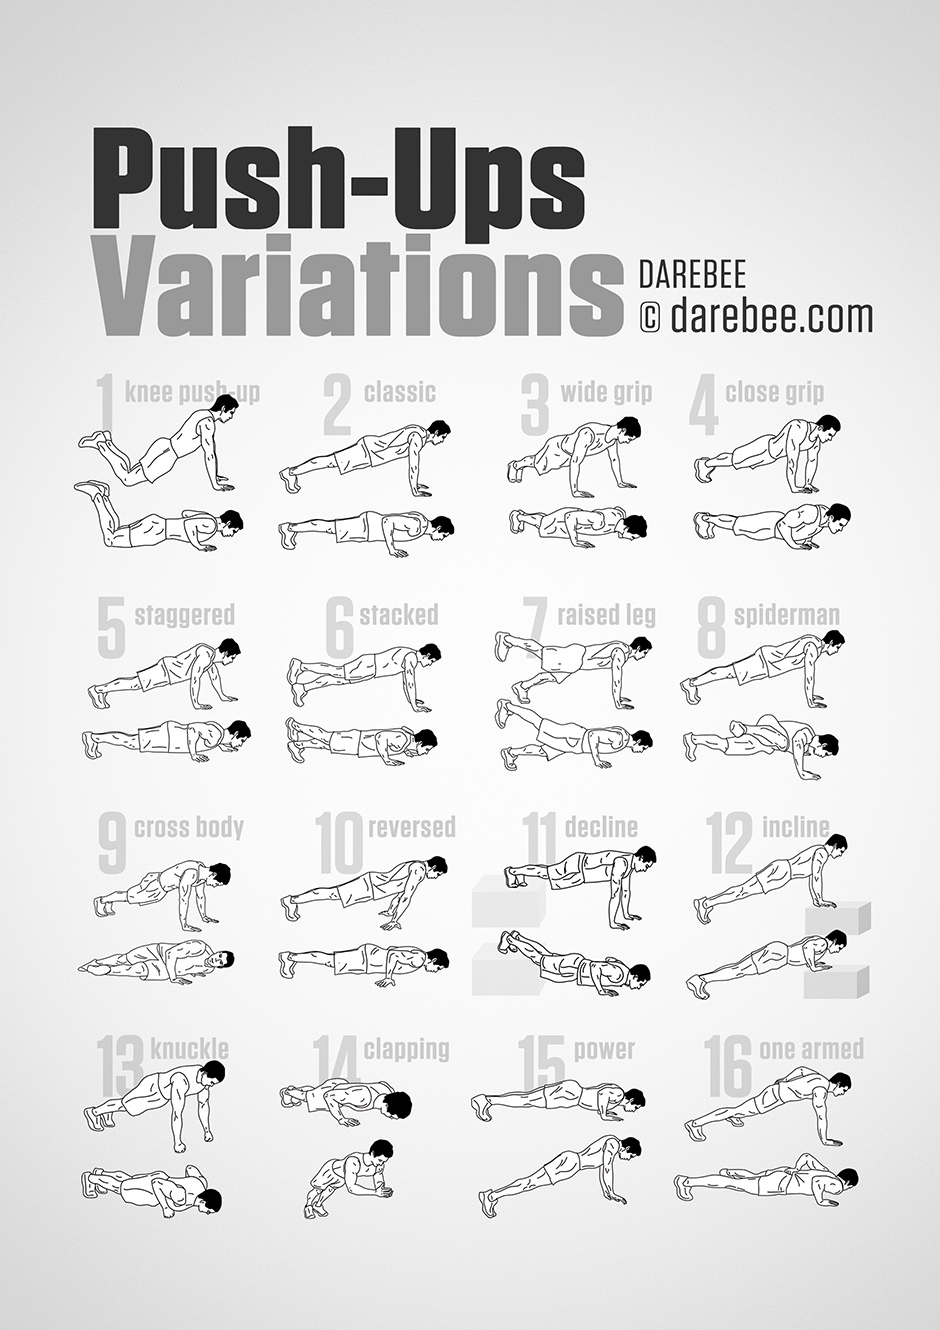 Push-Up variations to try